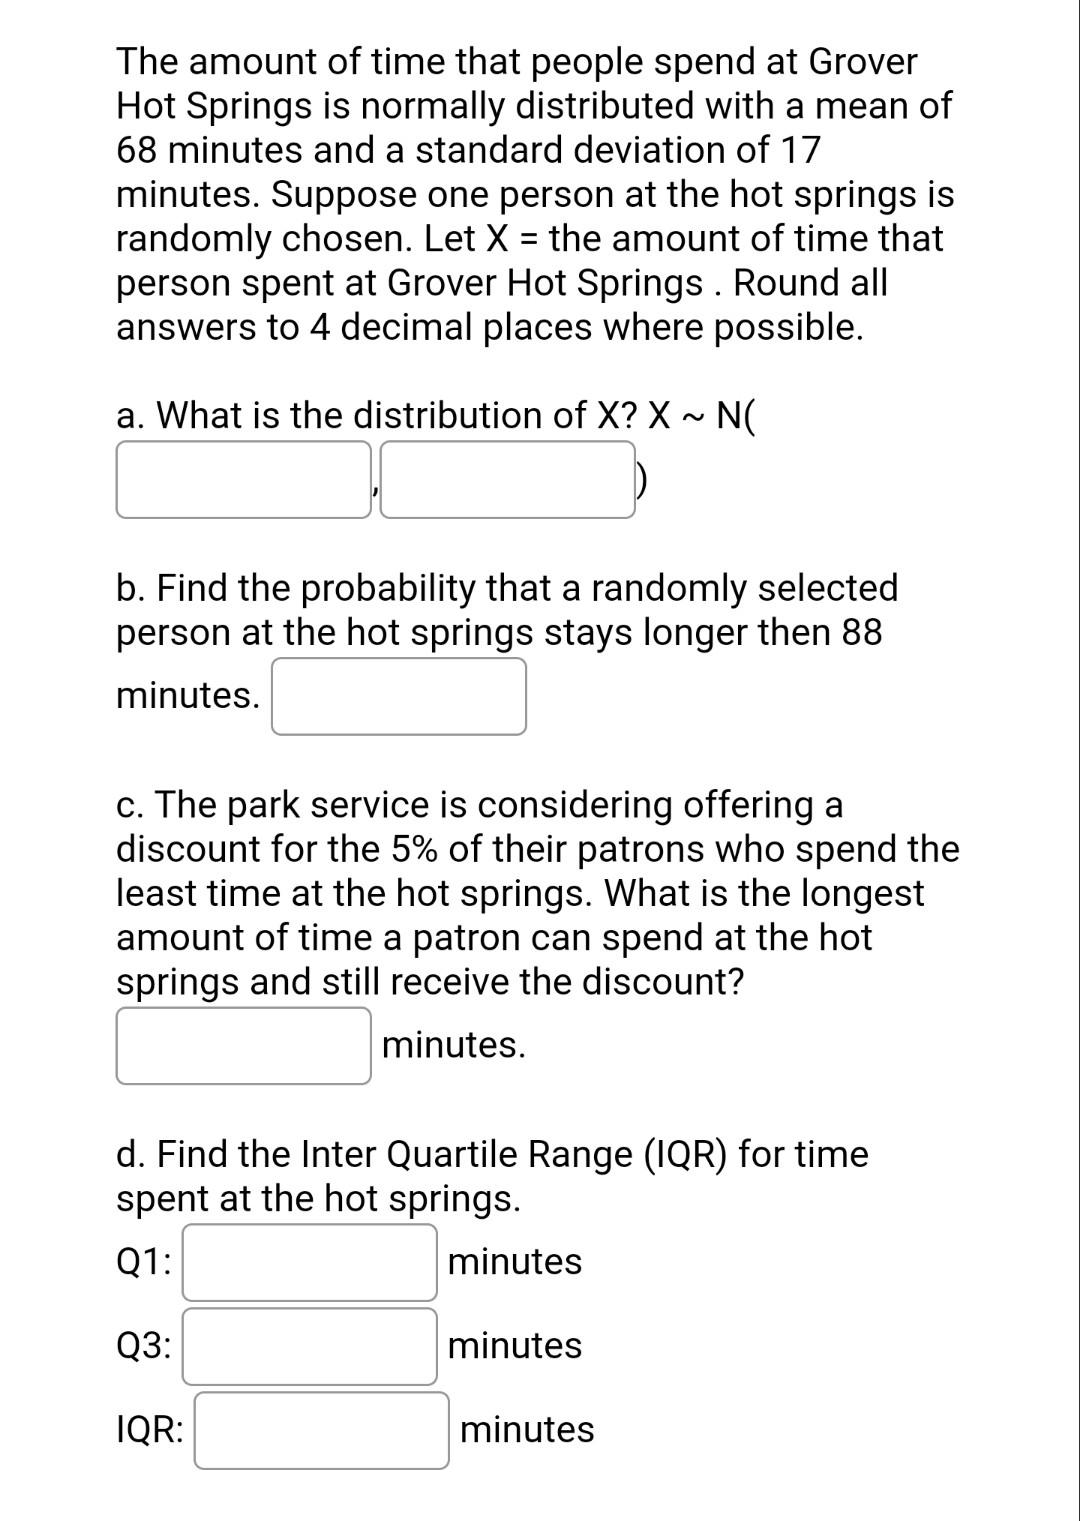 The Amount Of Time That People Spend At Grover Hot Springs Is Normally Distributed With A Mean Of 68 Minutes And A Stand 1